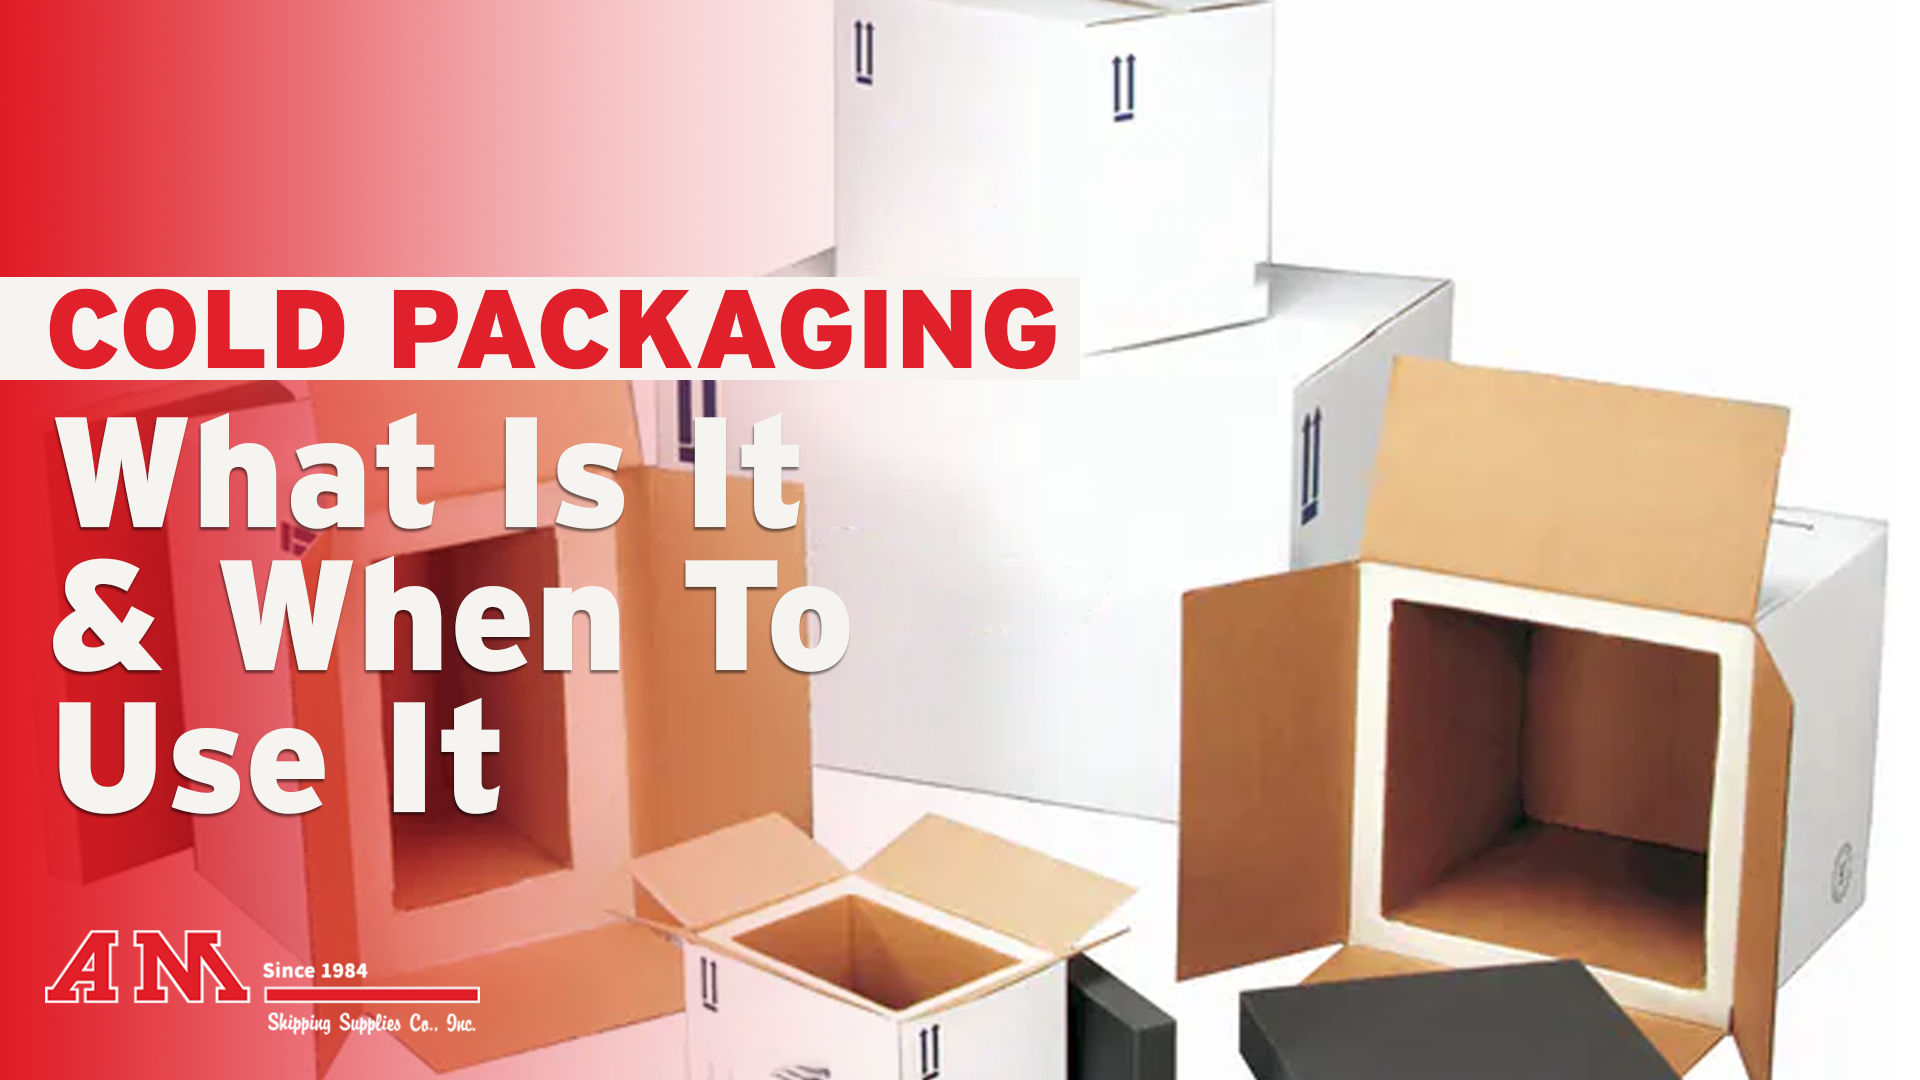 Cold Packaging What It is & When to Use It